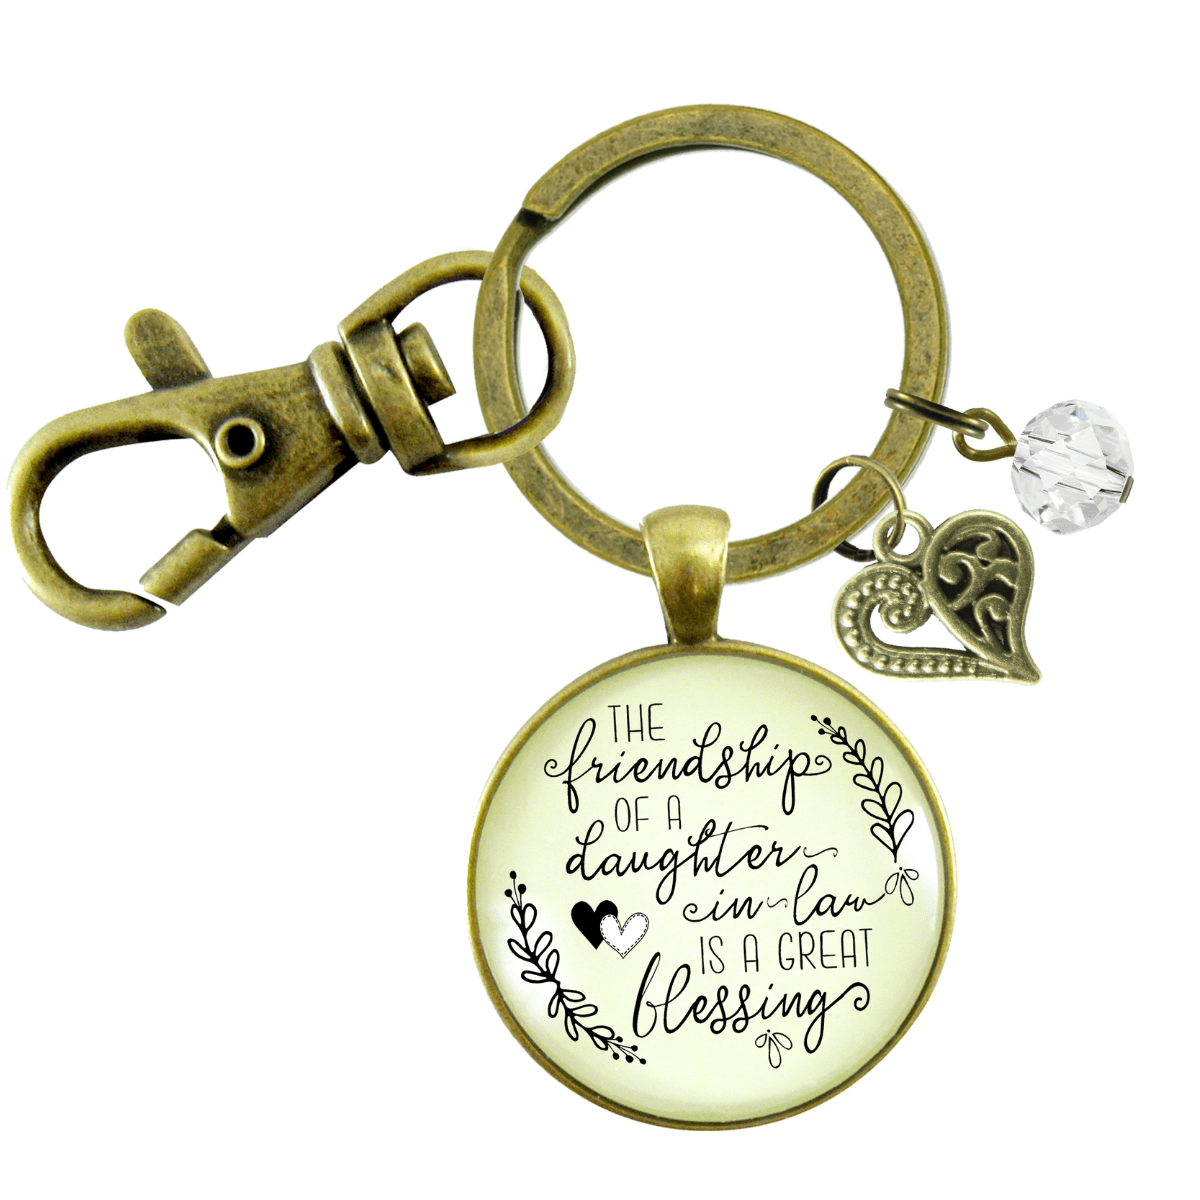 Daughter In Law Keychain Friendship Is A Great Blessing Gift From Mom Special Wedding Jewelry Heart - Gutsy Goodness Handmade Jewelry;Daughter In Law Keychain Friendship Is A Great Blessing Gift From Mom Special Wedding Jewelry Heart - Gutsy Goodness Handmade Jewelry Gifts